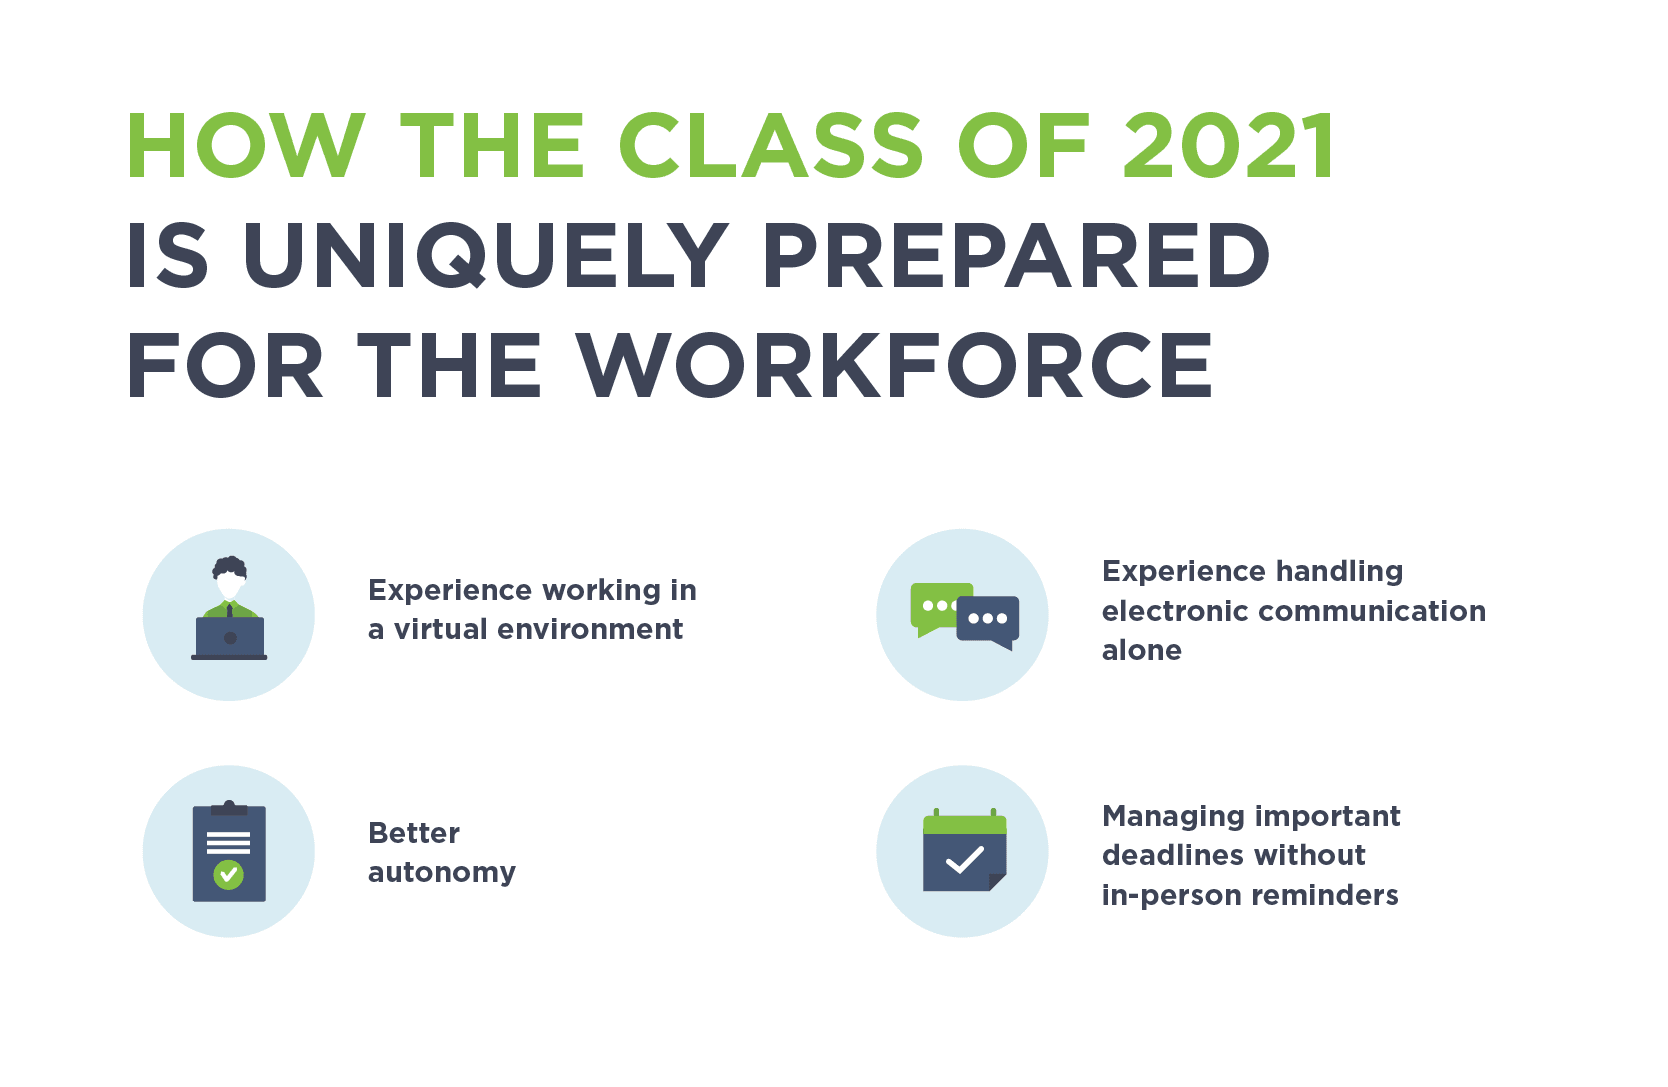 College grads in 2021 are uniquely prepared for the workforce, due in part to the pandemic.